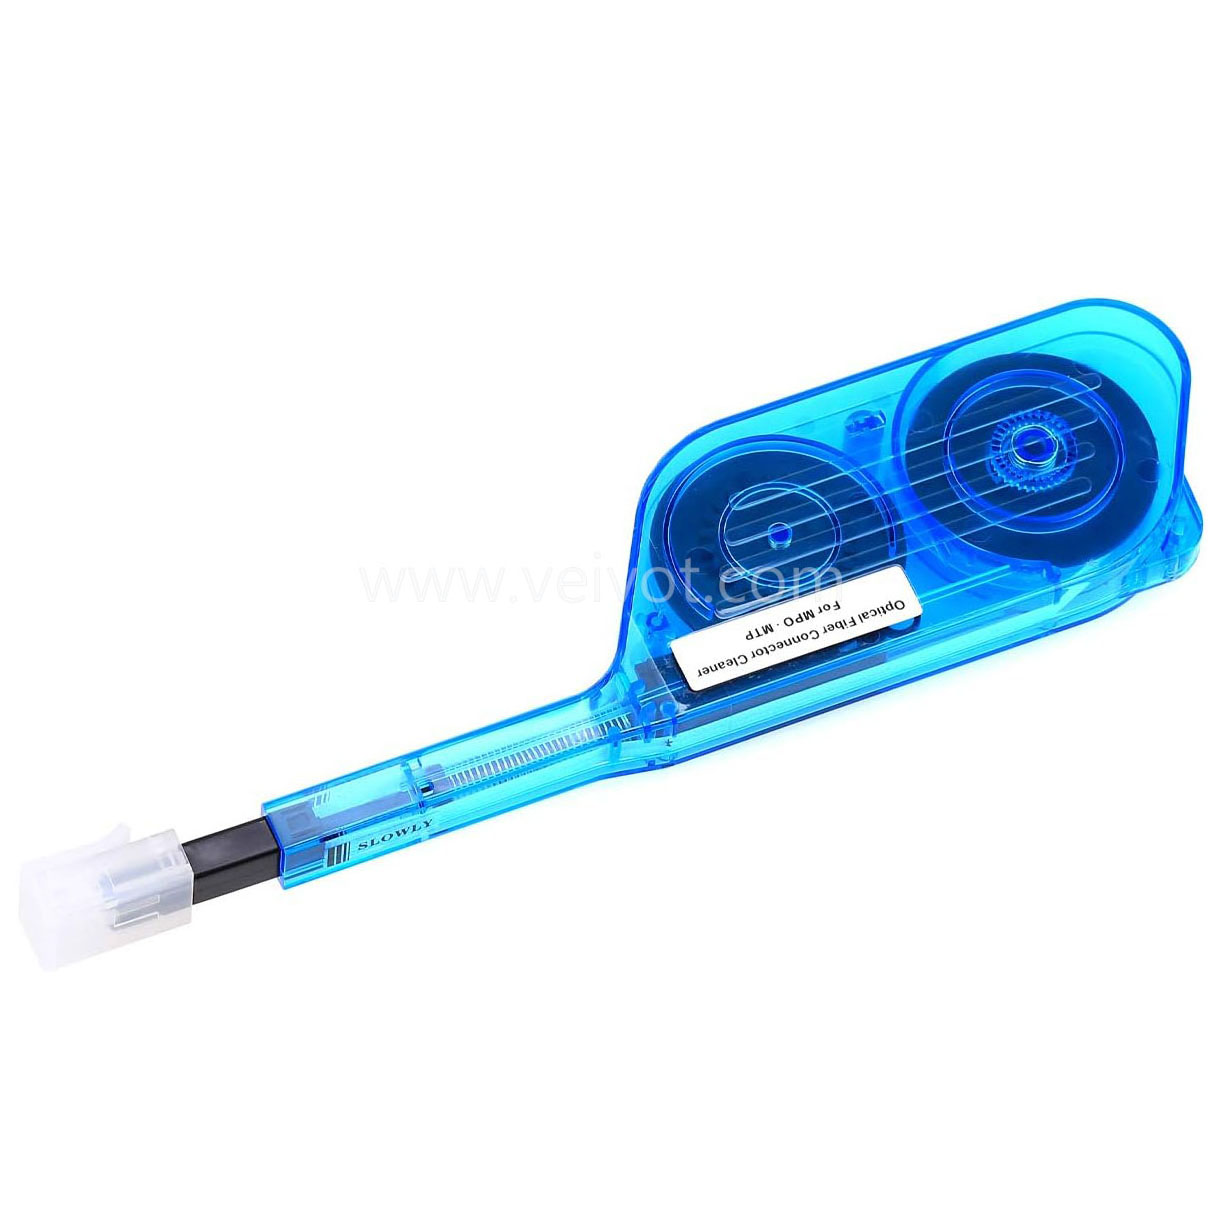 ,,,One Click MPO MTP Fiber Optic Cleaner (4),One Click MPO MTP Fiber Optic Cleaner - VEIVOT (1),One Click MPO MTP Fiber Optic Cleaner - VEIVOT (3),One Click MPO MTP Fiber Optic Cleaner - VEIVOT (4),,,,One Click MPO MTP Fiber Optic Cleaner - VEIVOT (4),,,,,